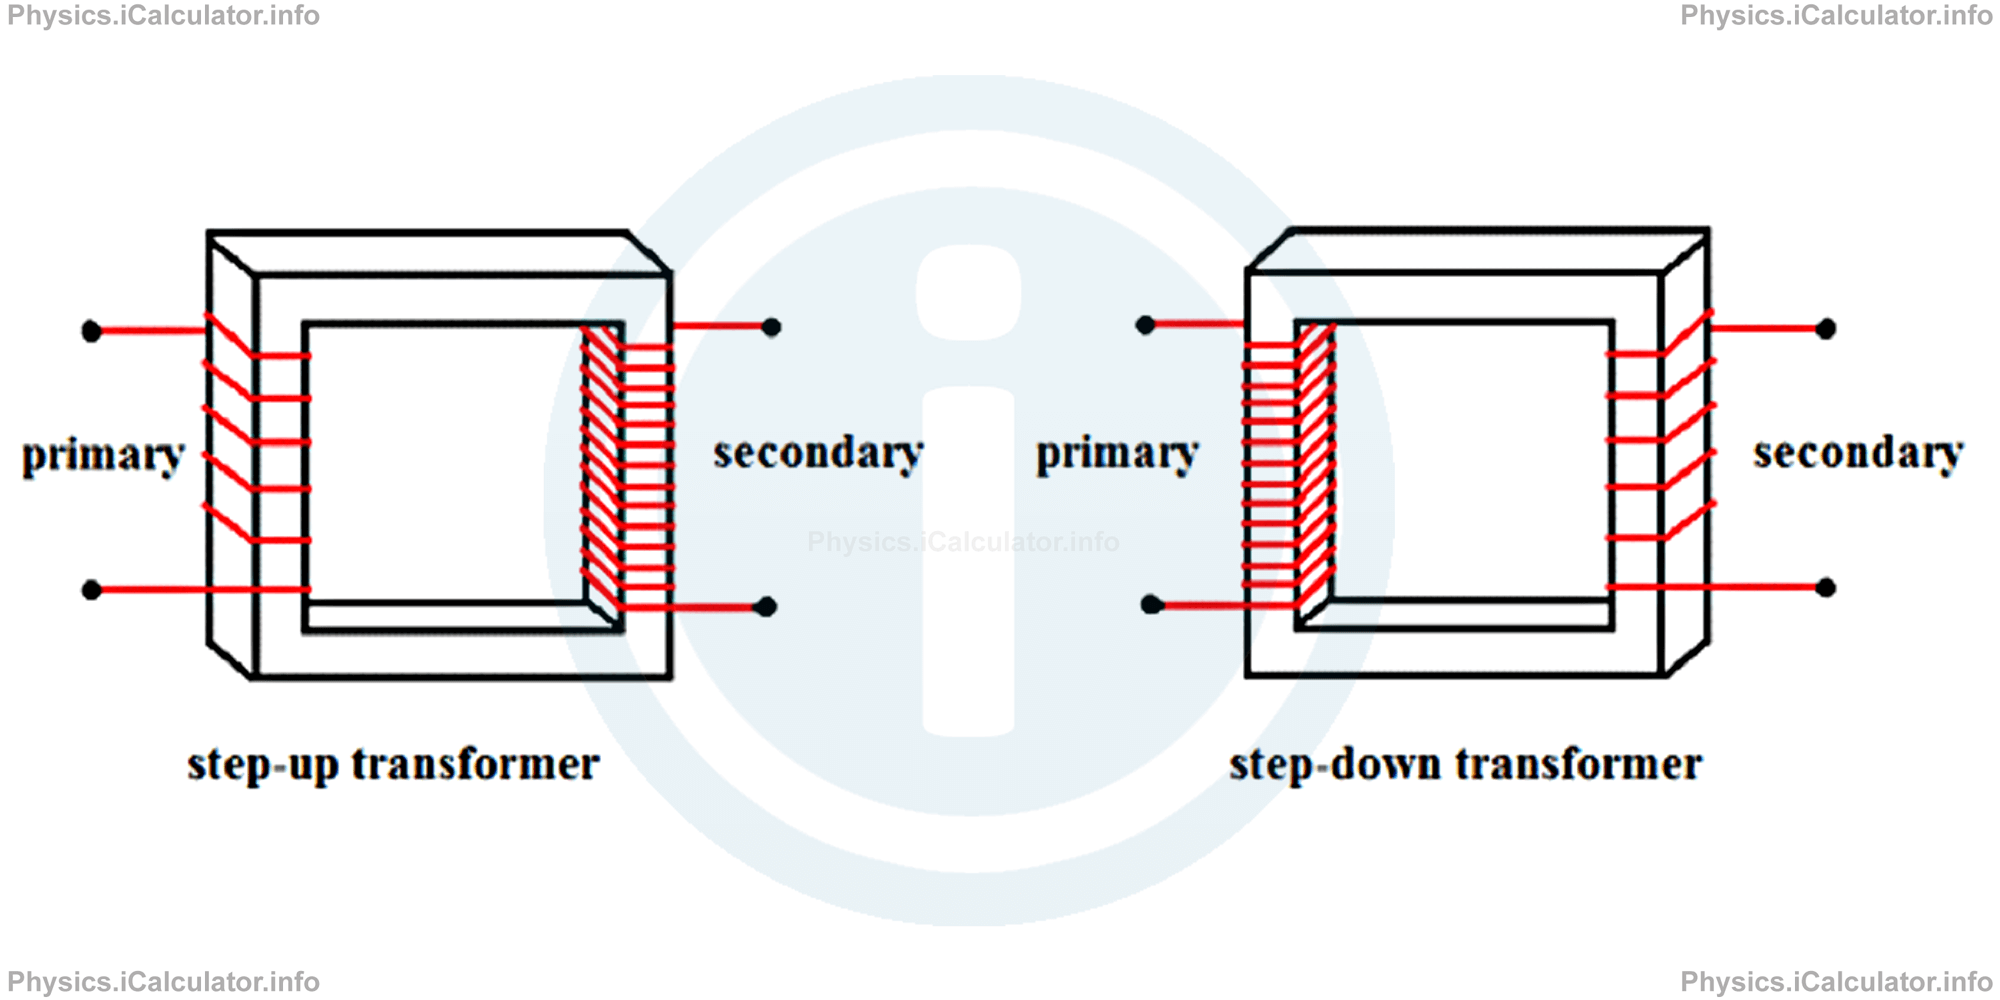 Physics Tutorials: This image provides visual information for the physics tutorial Power in an Alternating Circuit. Transformers 